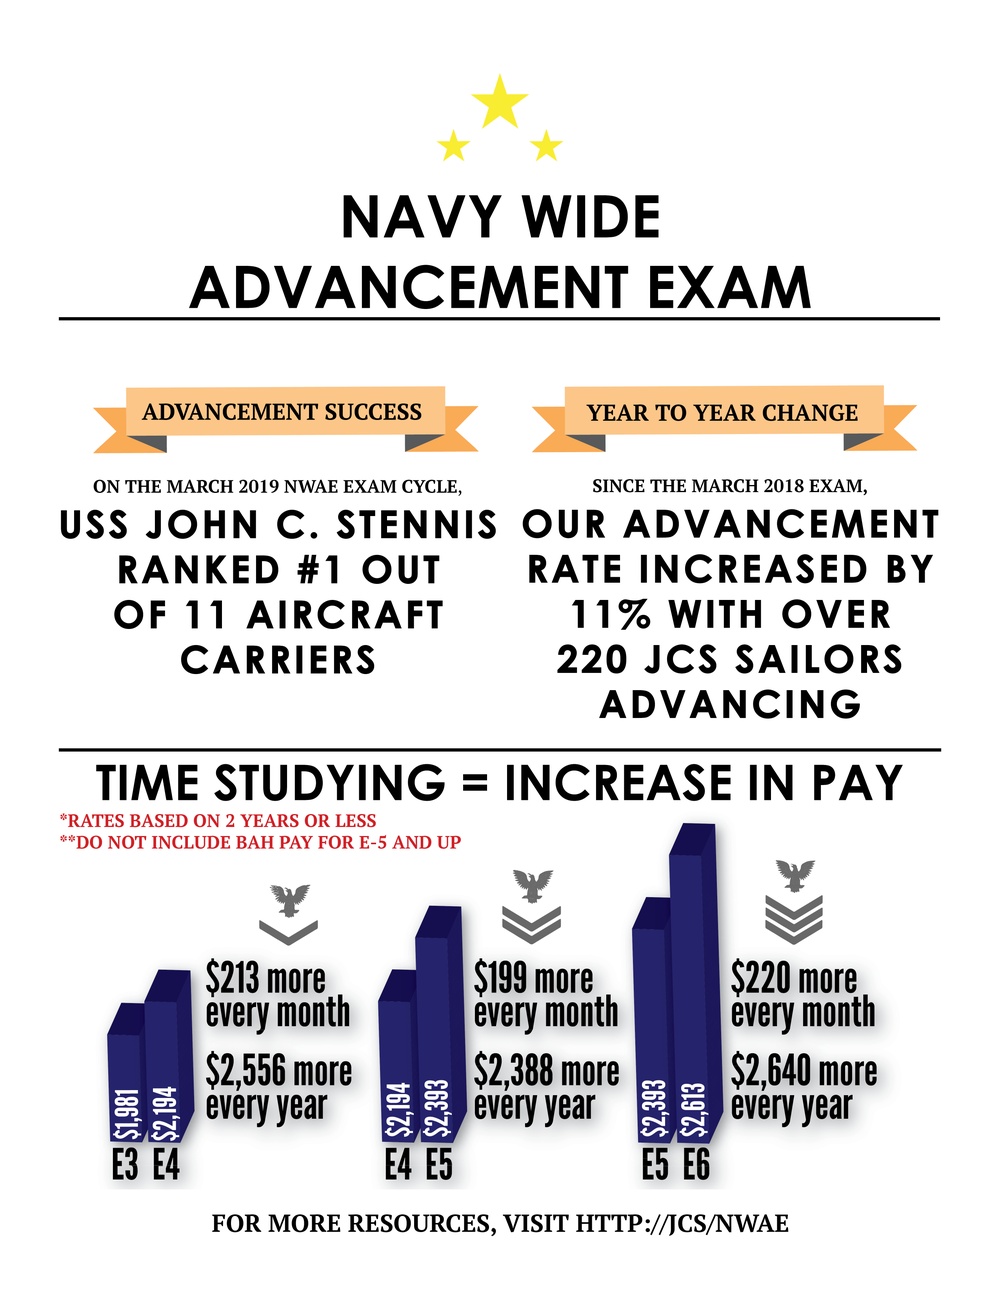 An infographic created to display Navy Wide Advancement Exam